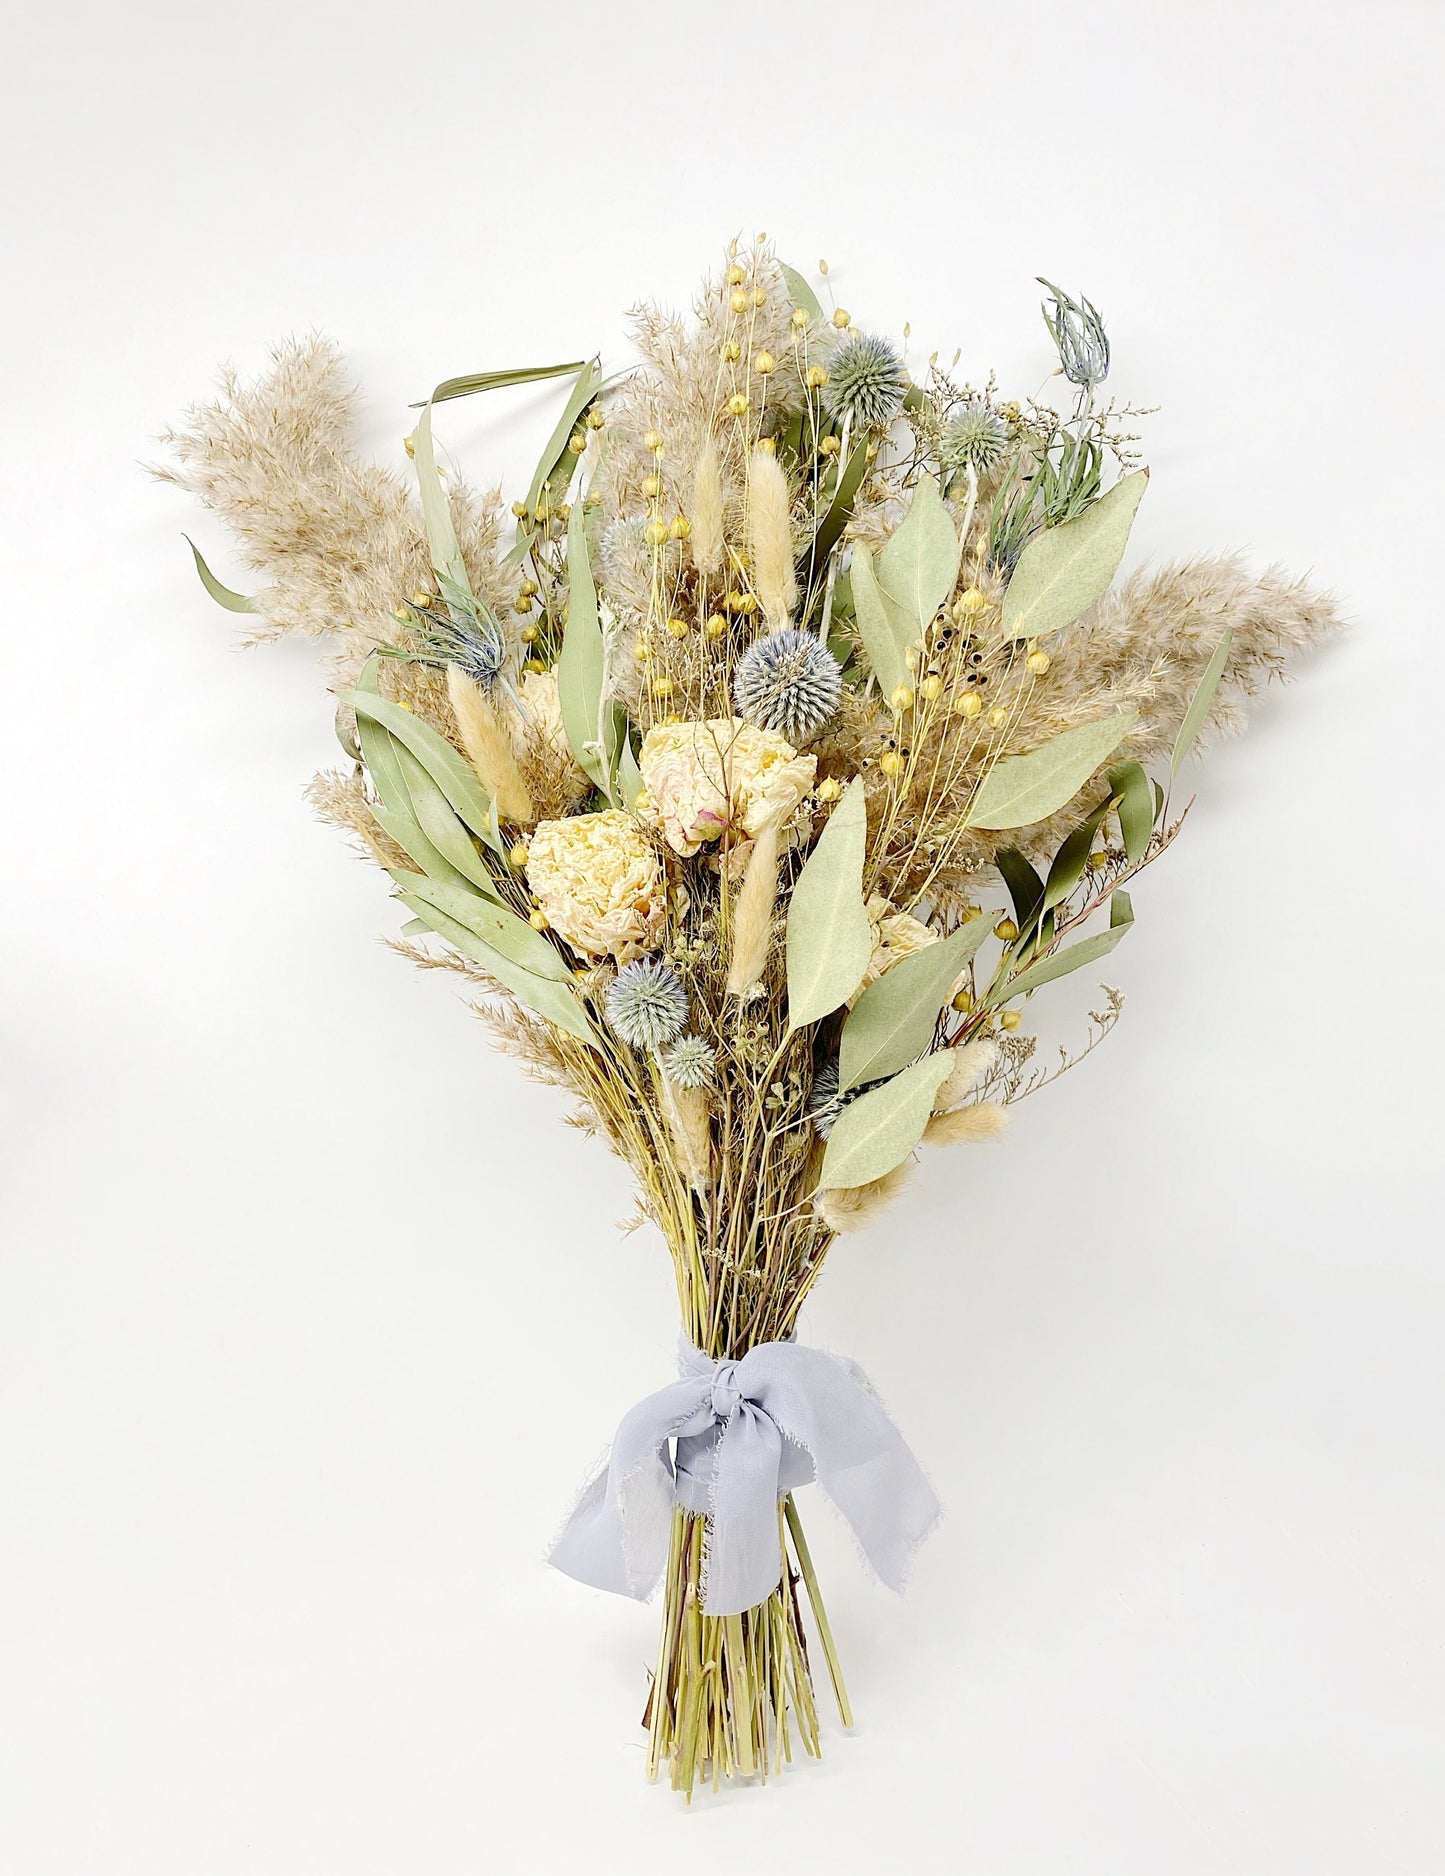 Wedding Bouquet, Pampas Grass, Dried Flowers, Summer, Bridal, Floral, Preserved Flowers, Peonies, Fairy, Blue, Natural, Flax, Greenery